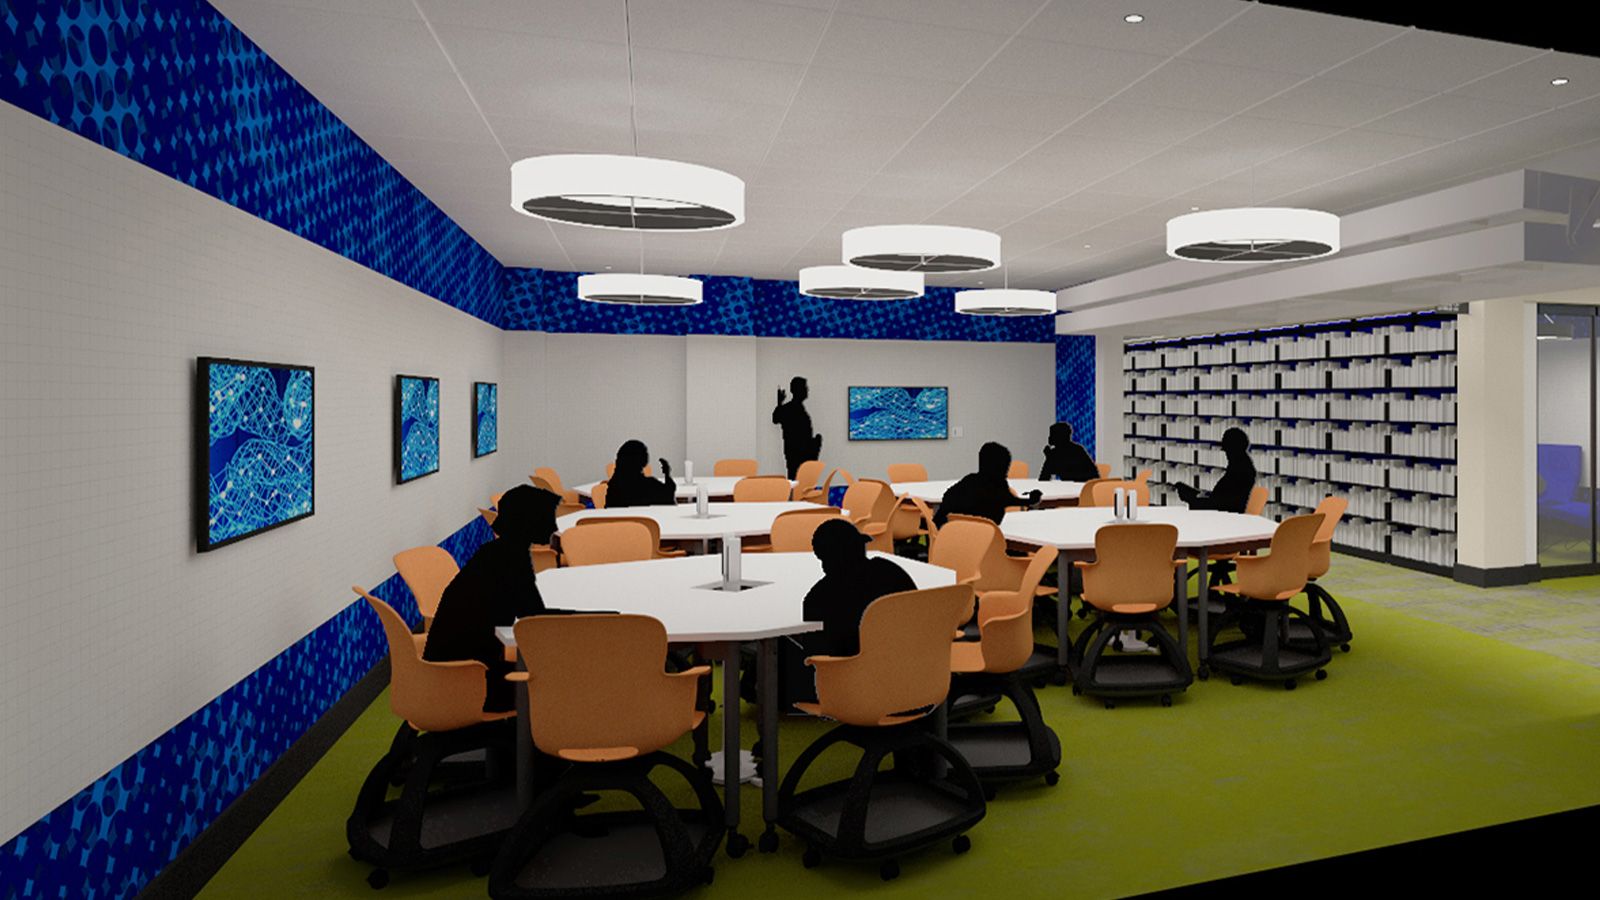 Library 5th floor rendering of the learning studio